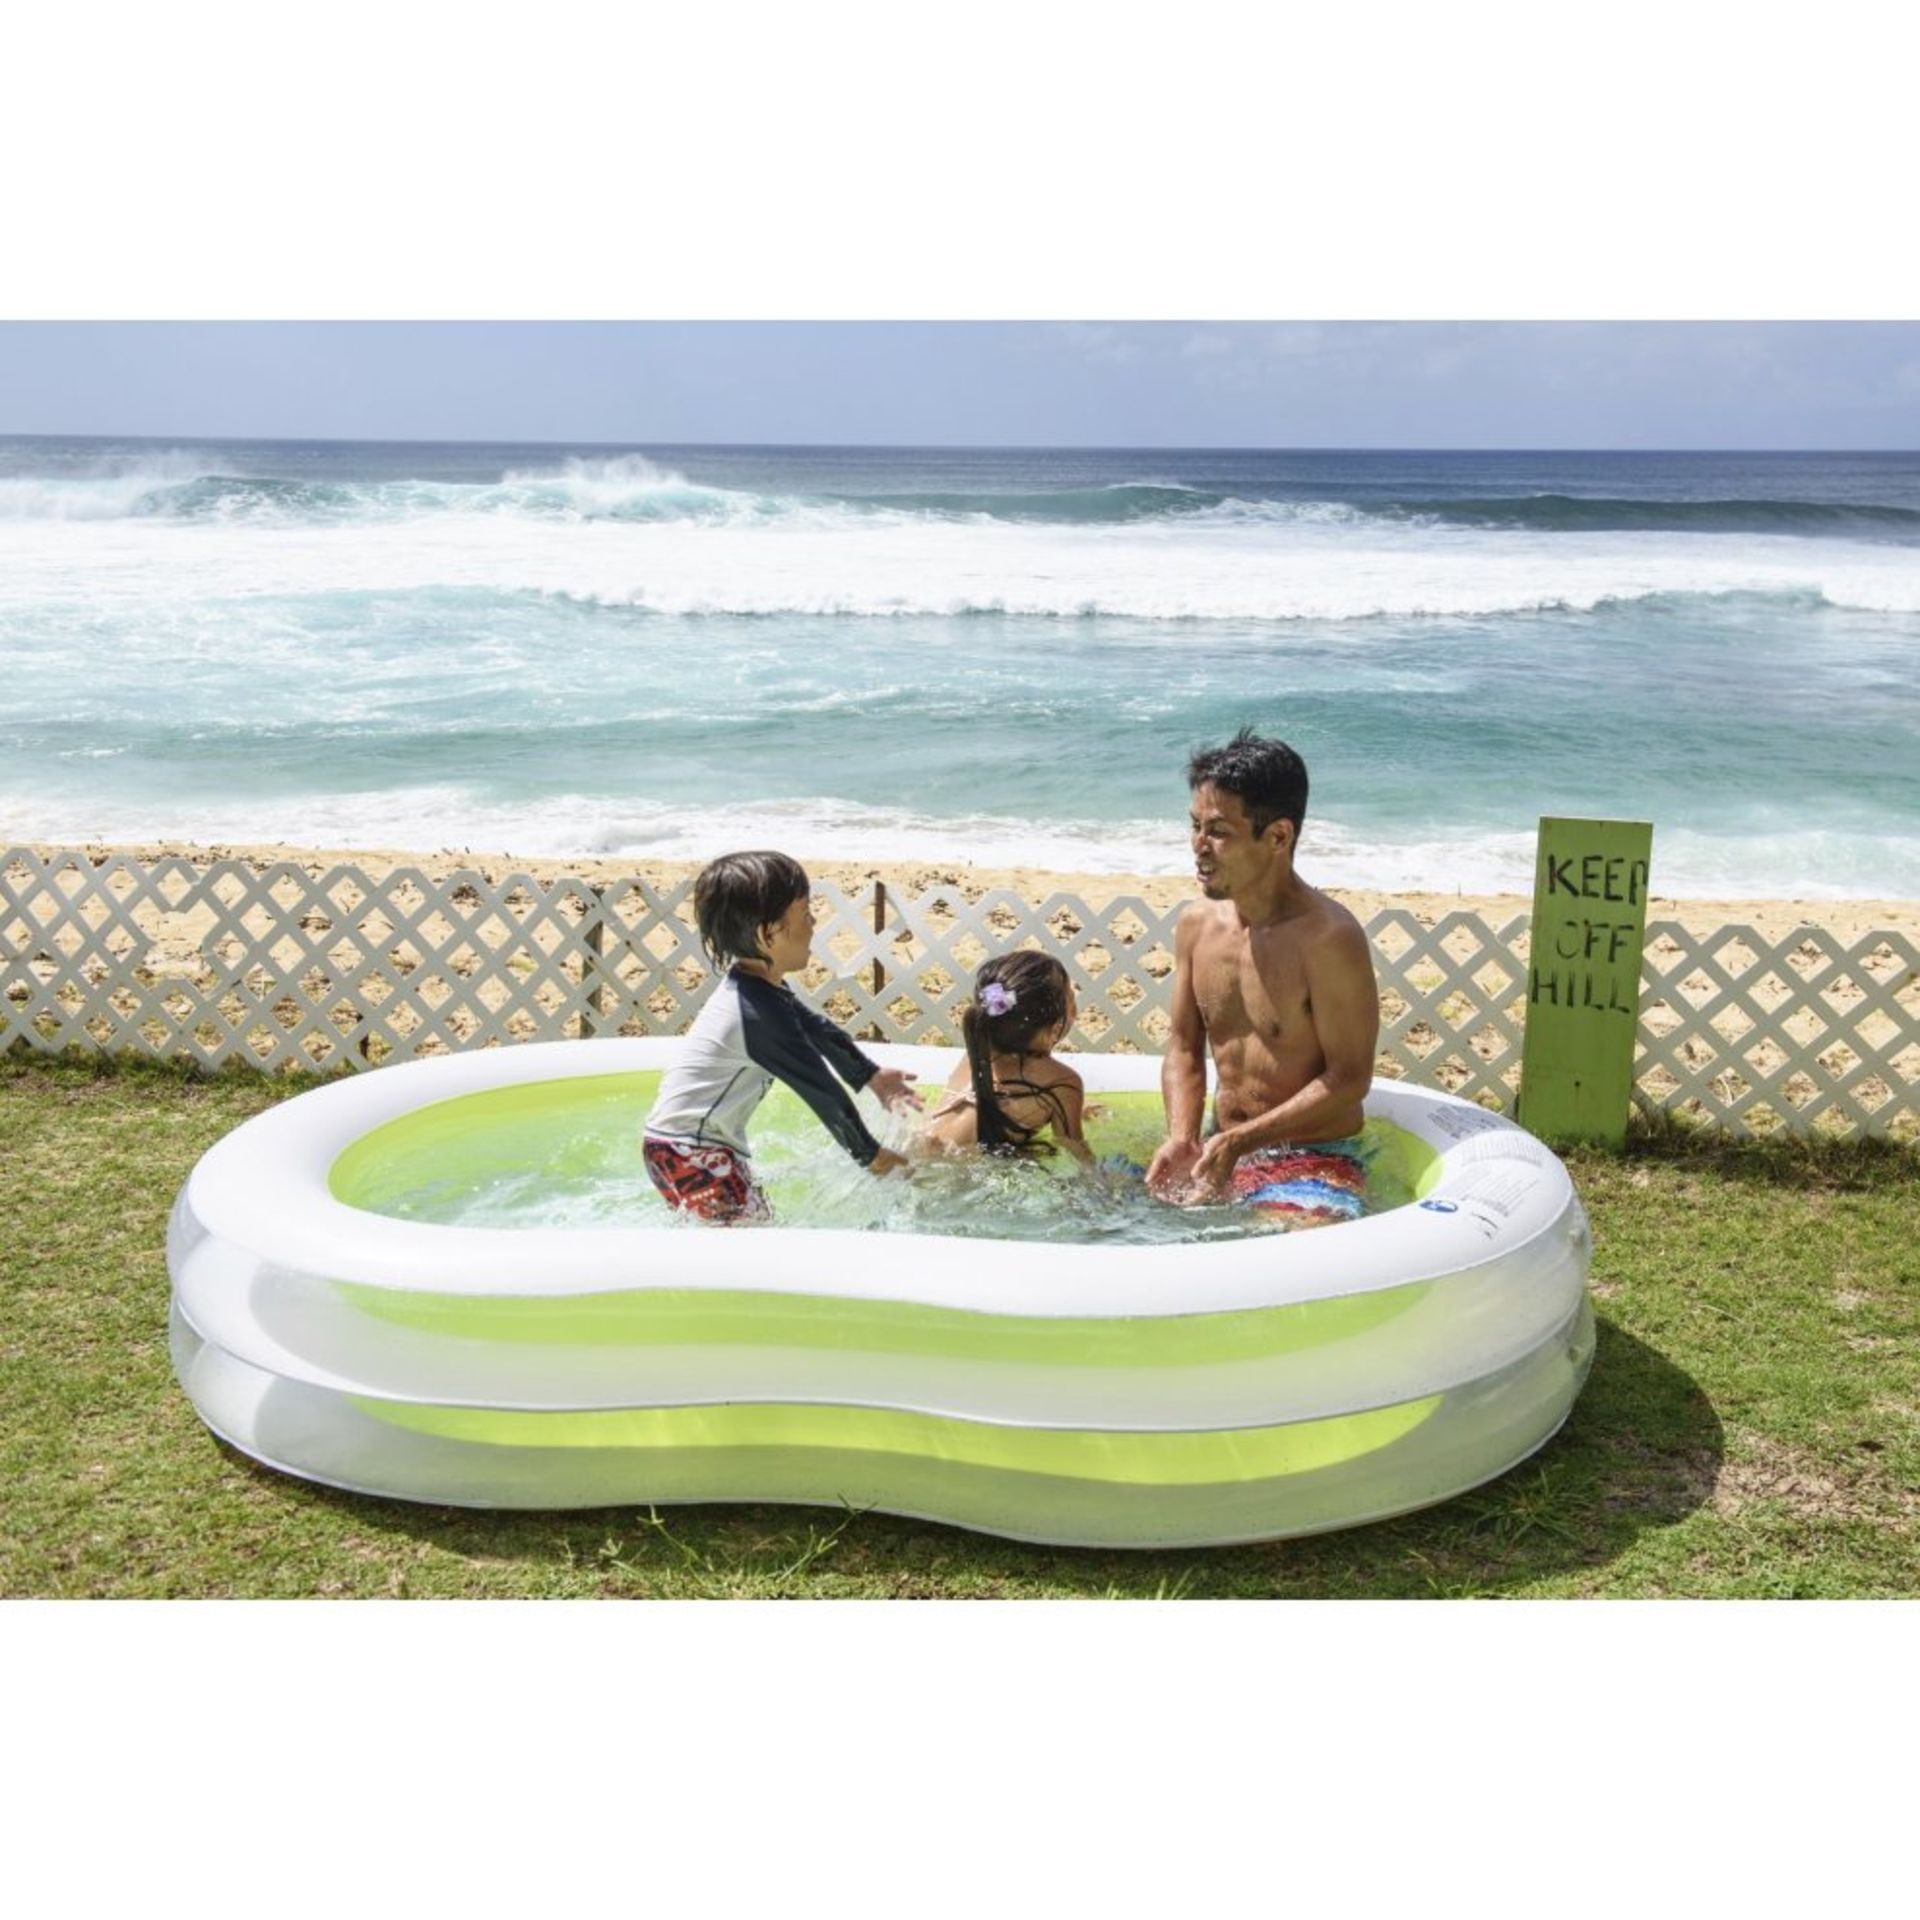 6 X BRAND NEW JILONG GIANT FIGURE OF 8 POOL - 2 INFLATABLE RINGS FOR STABLE AND SECURE POSITION (